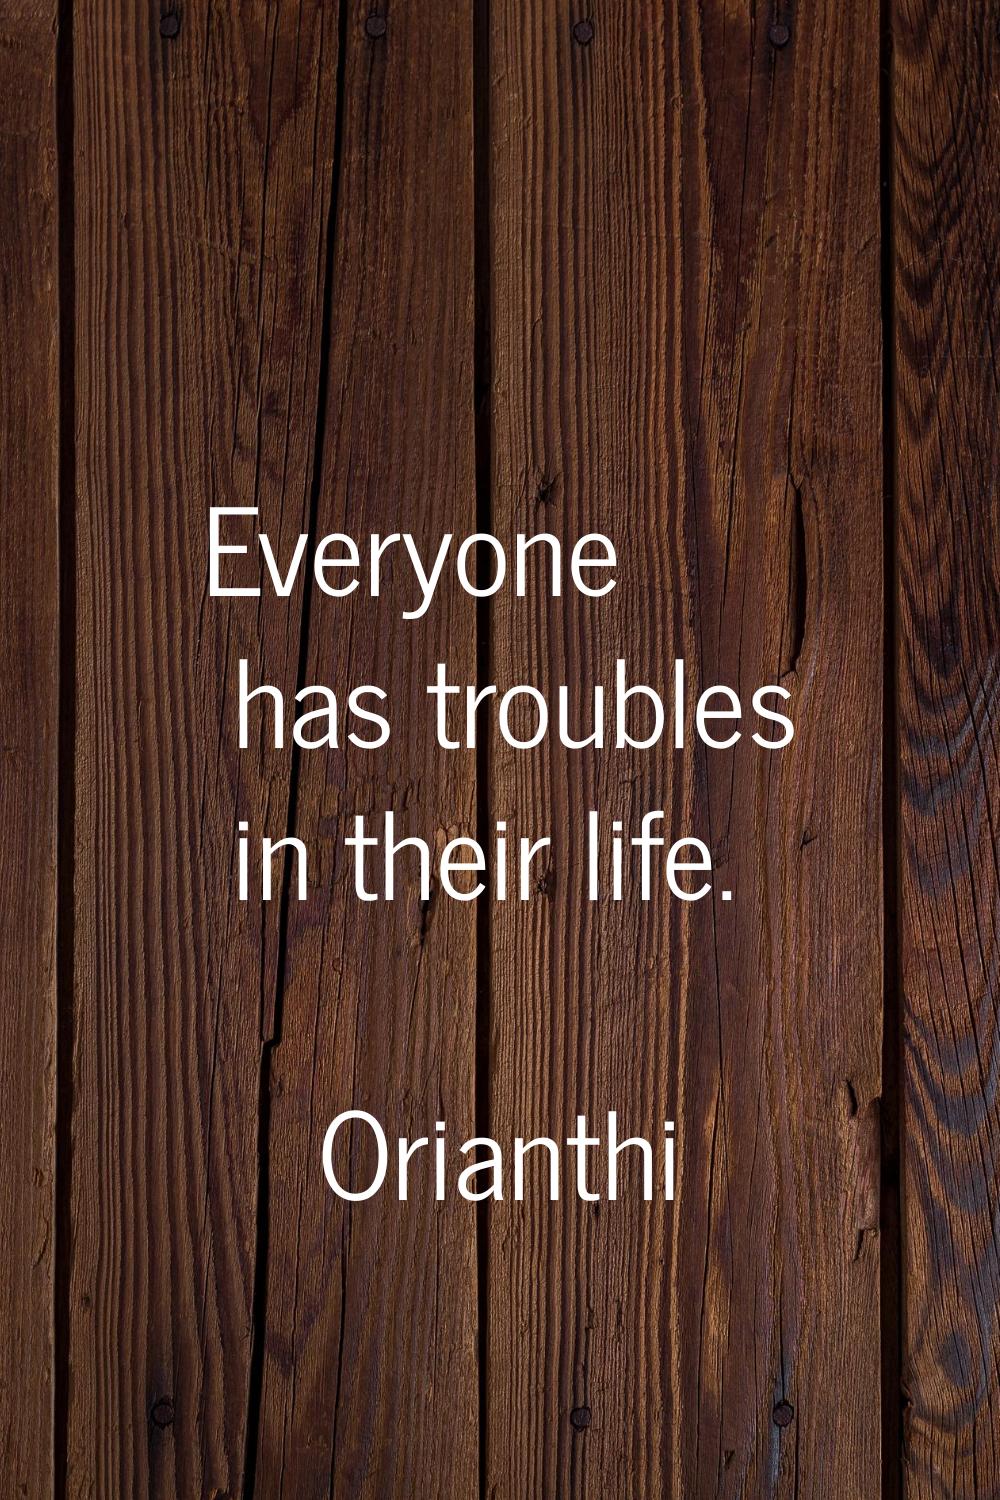 Everyone has troubles in their life.